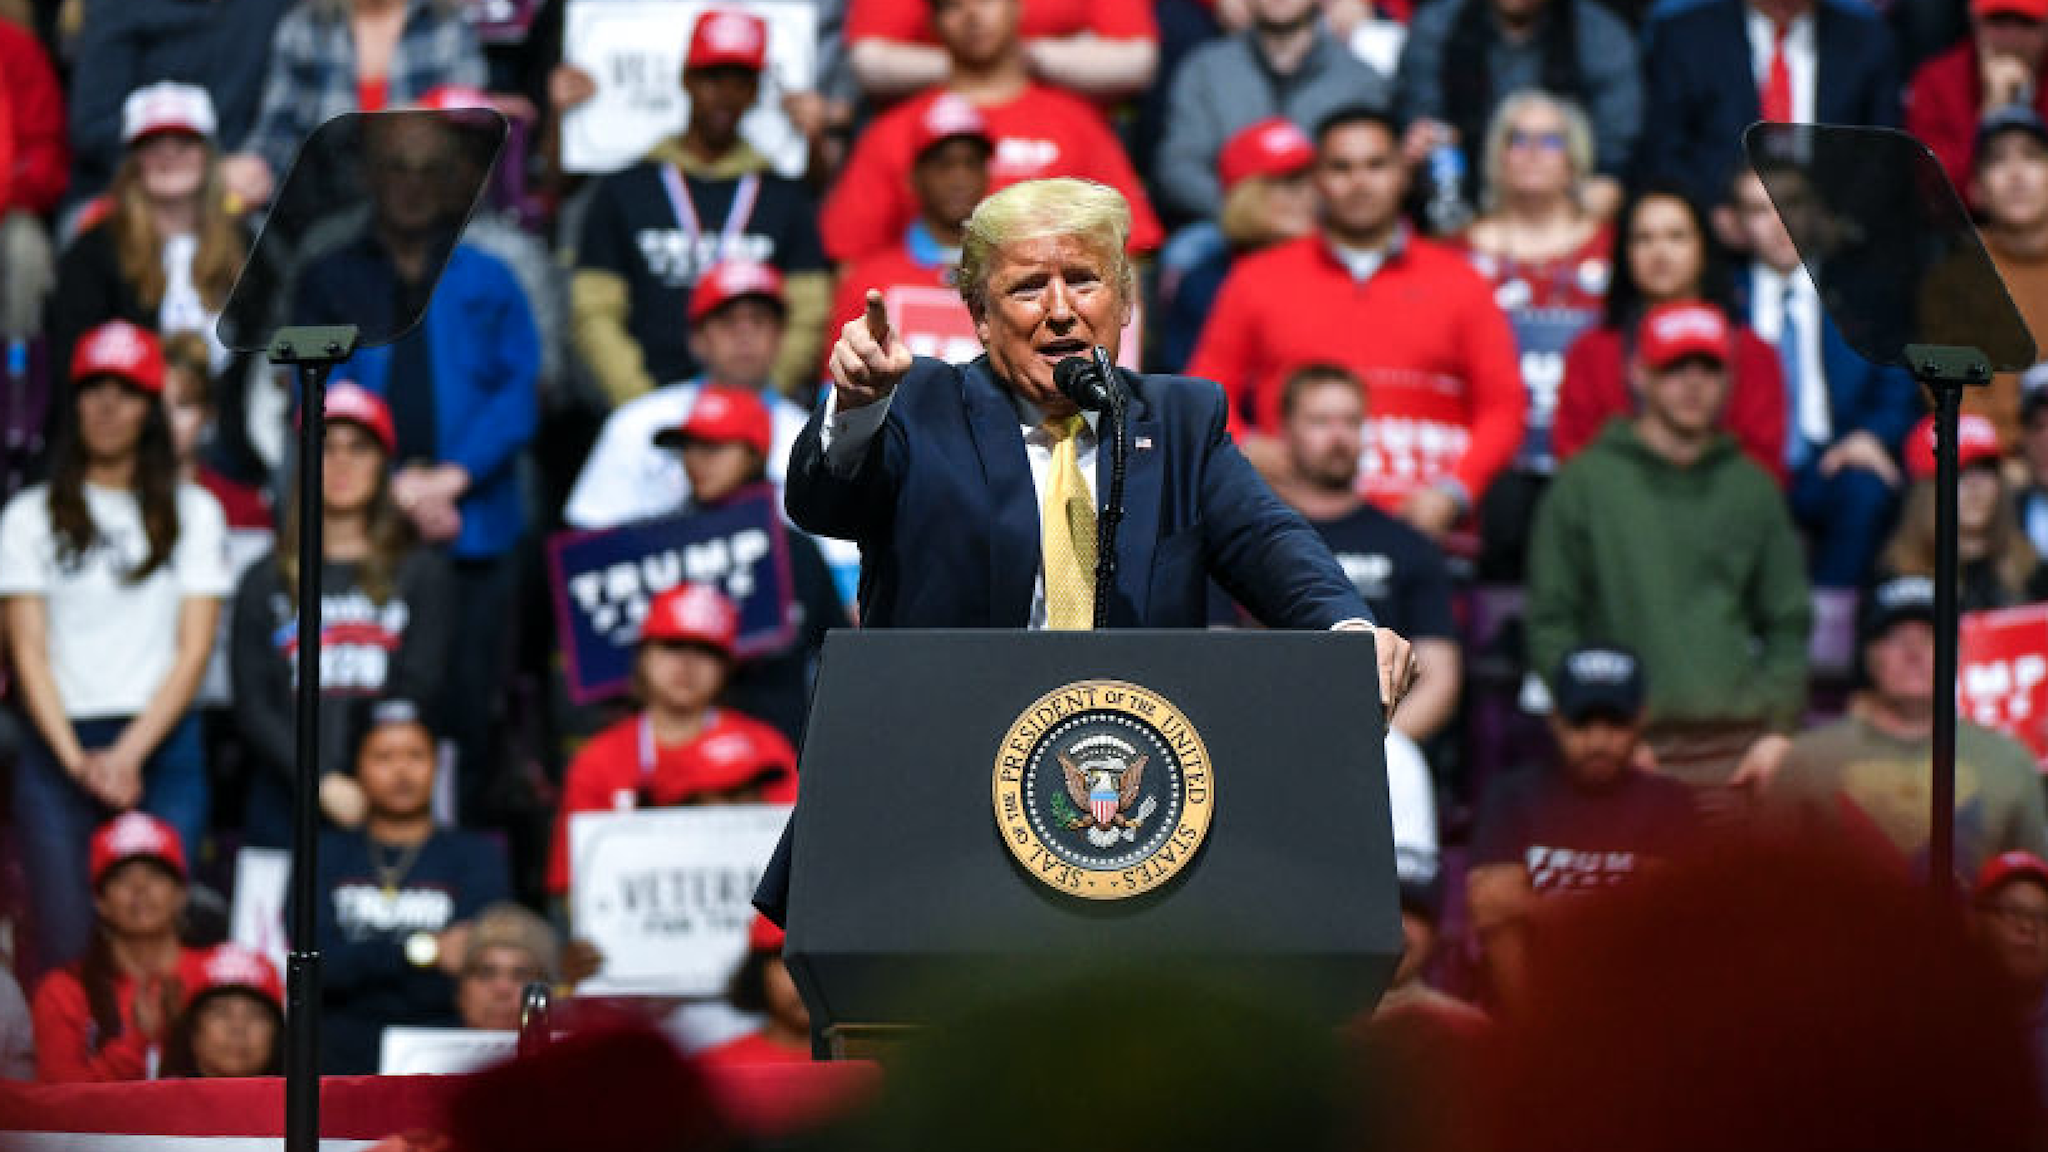 President Donald Trump speaks to supporters during a Keep America Great rally on February 20, 2020 in Colorado Springs, Colorado.